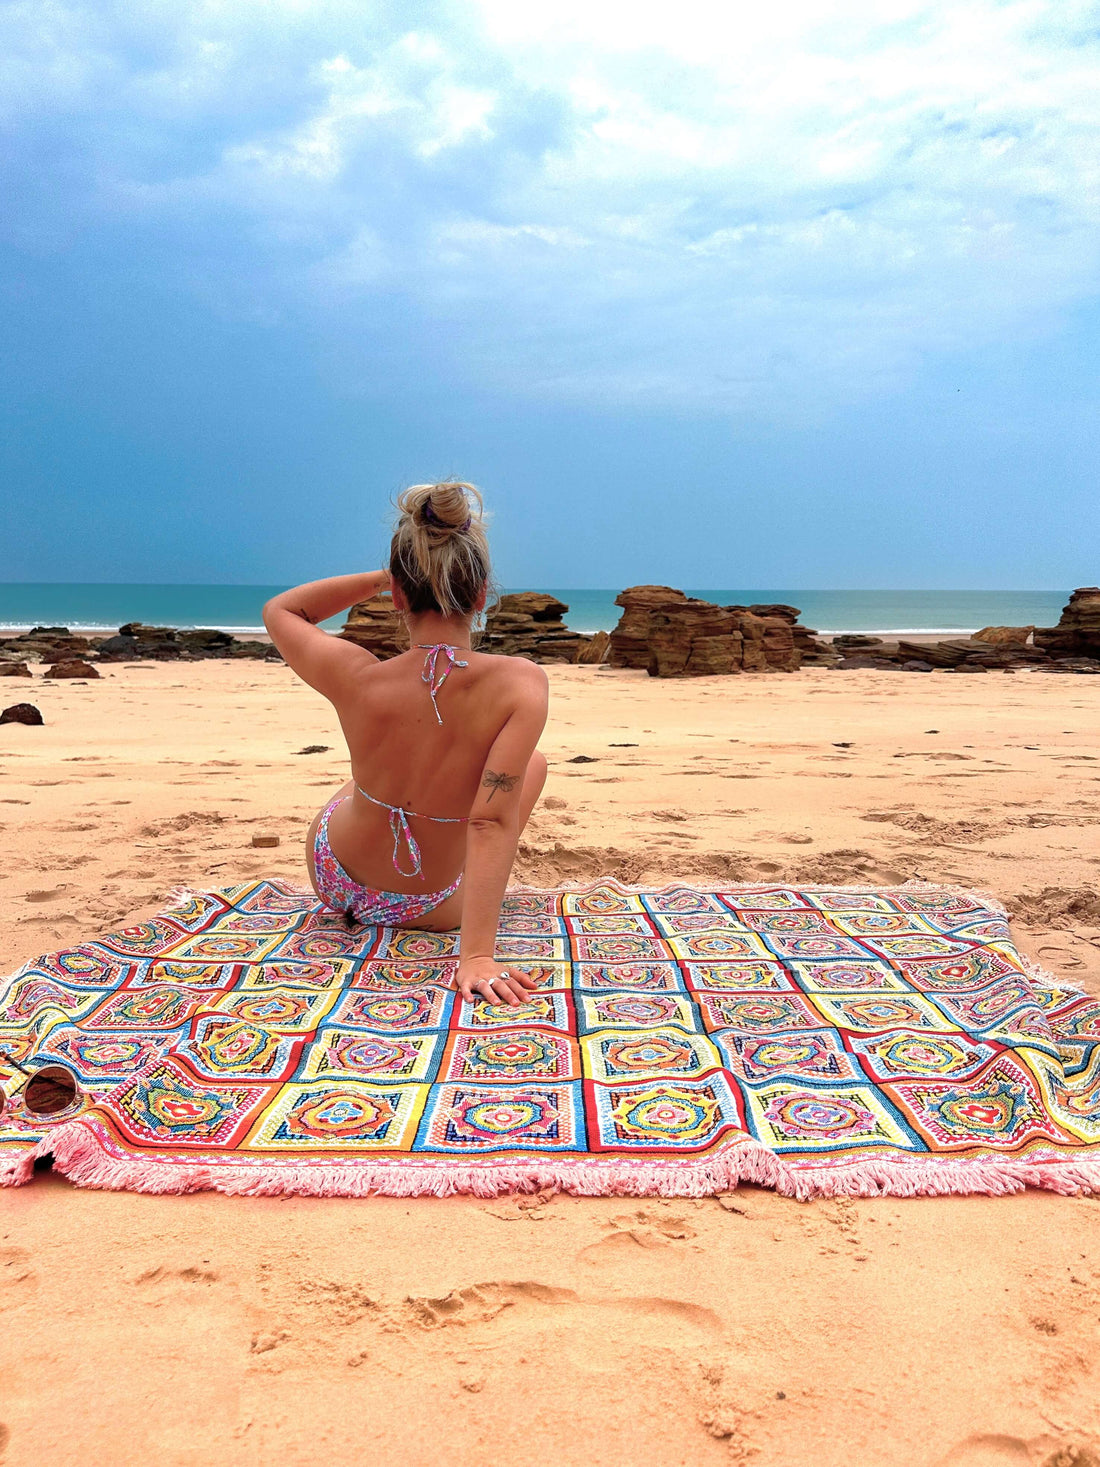 Forever Young throw rug on the sand overlooking a storm rolling in over the ocean. Young woman sits on throw beach blanket looking out.